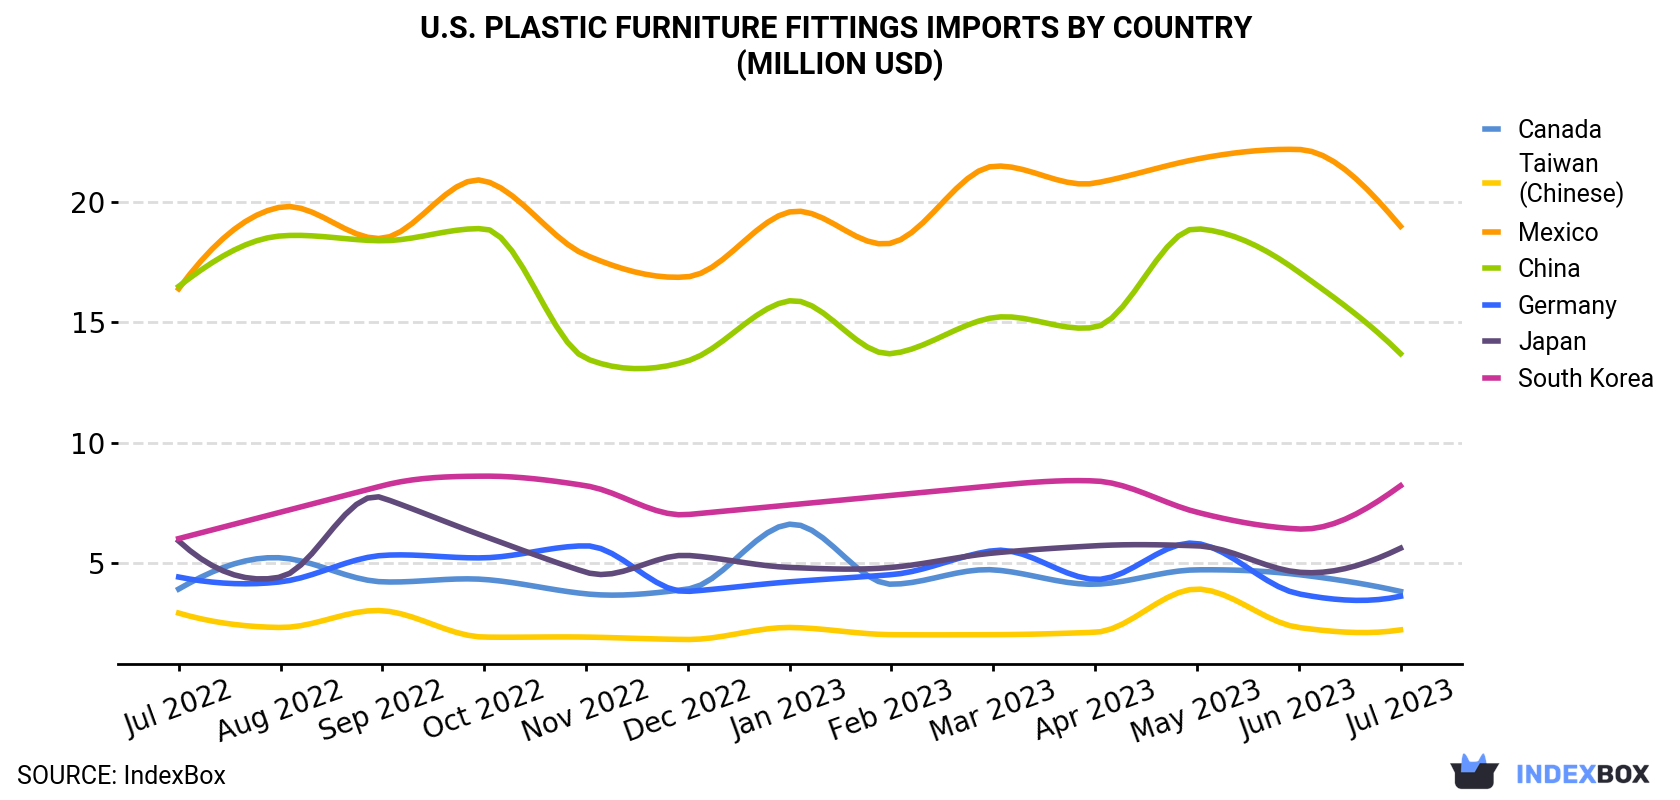 U.S. Plastic Furniture Fittings Imports By Country (Million USD)